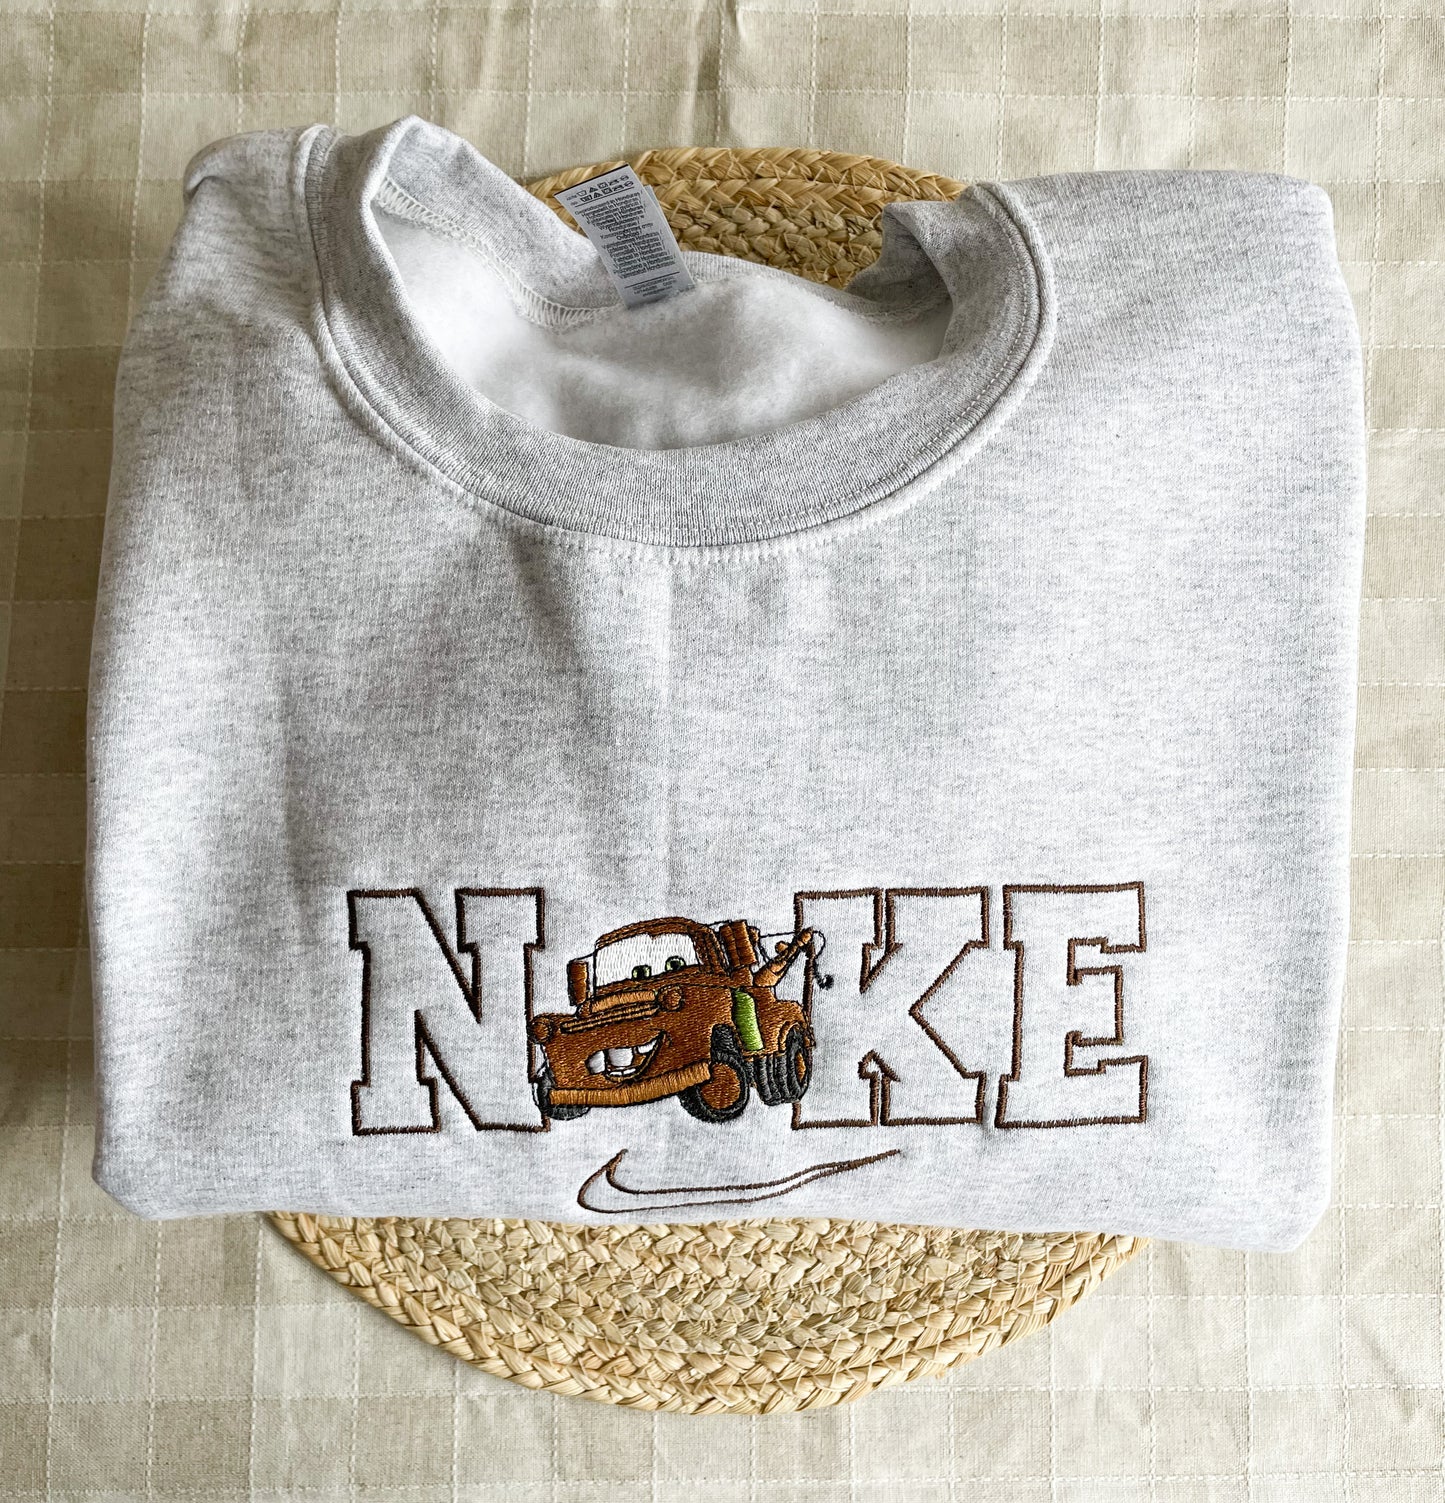 Mater CARS Sweater